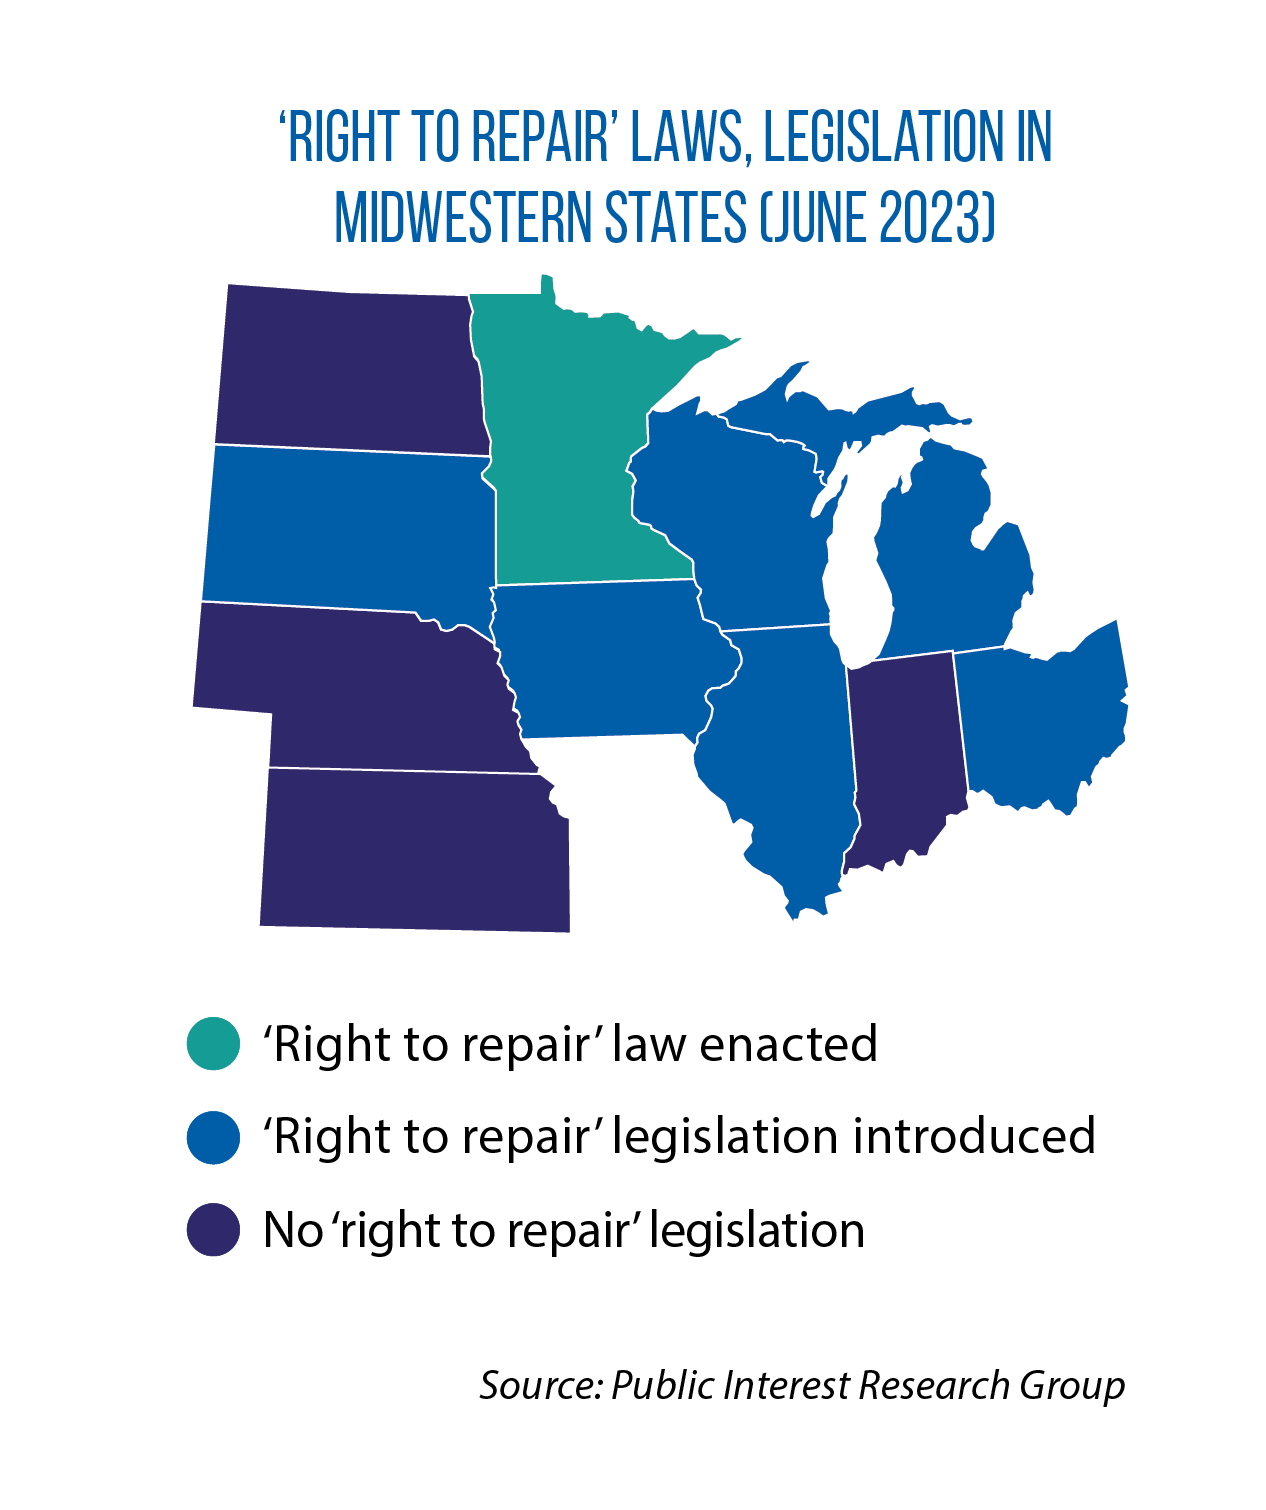 Map of "right to repair" laws and legislation in Midwestern states as of June 2023